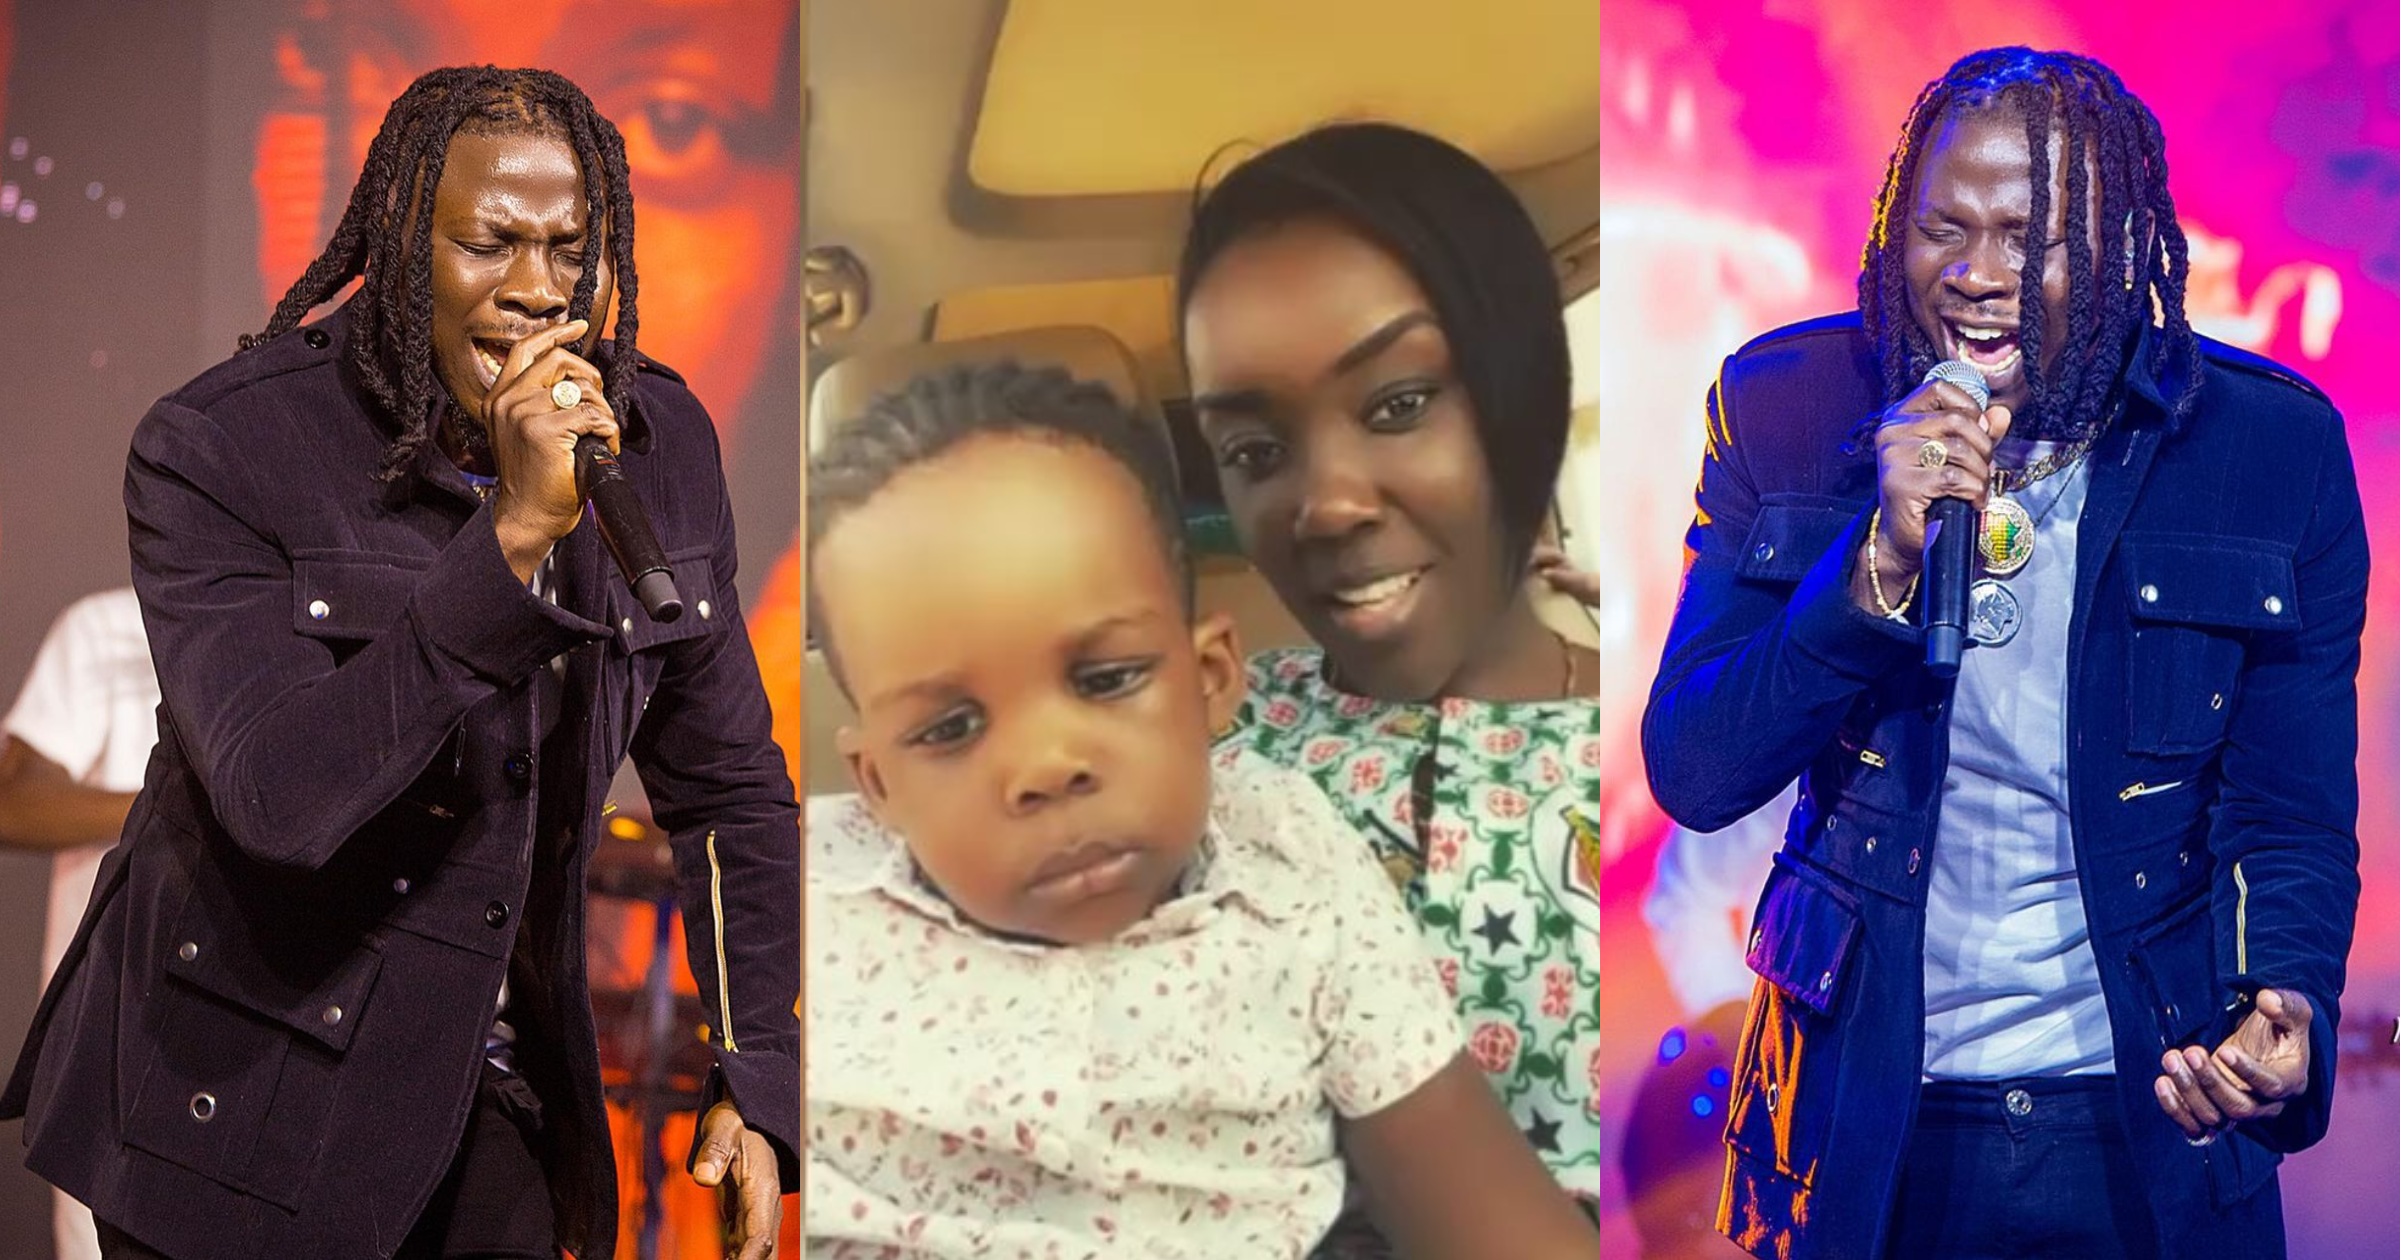 Stonebwoy's wife steps out with their son Janam in new video